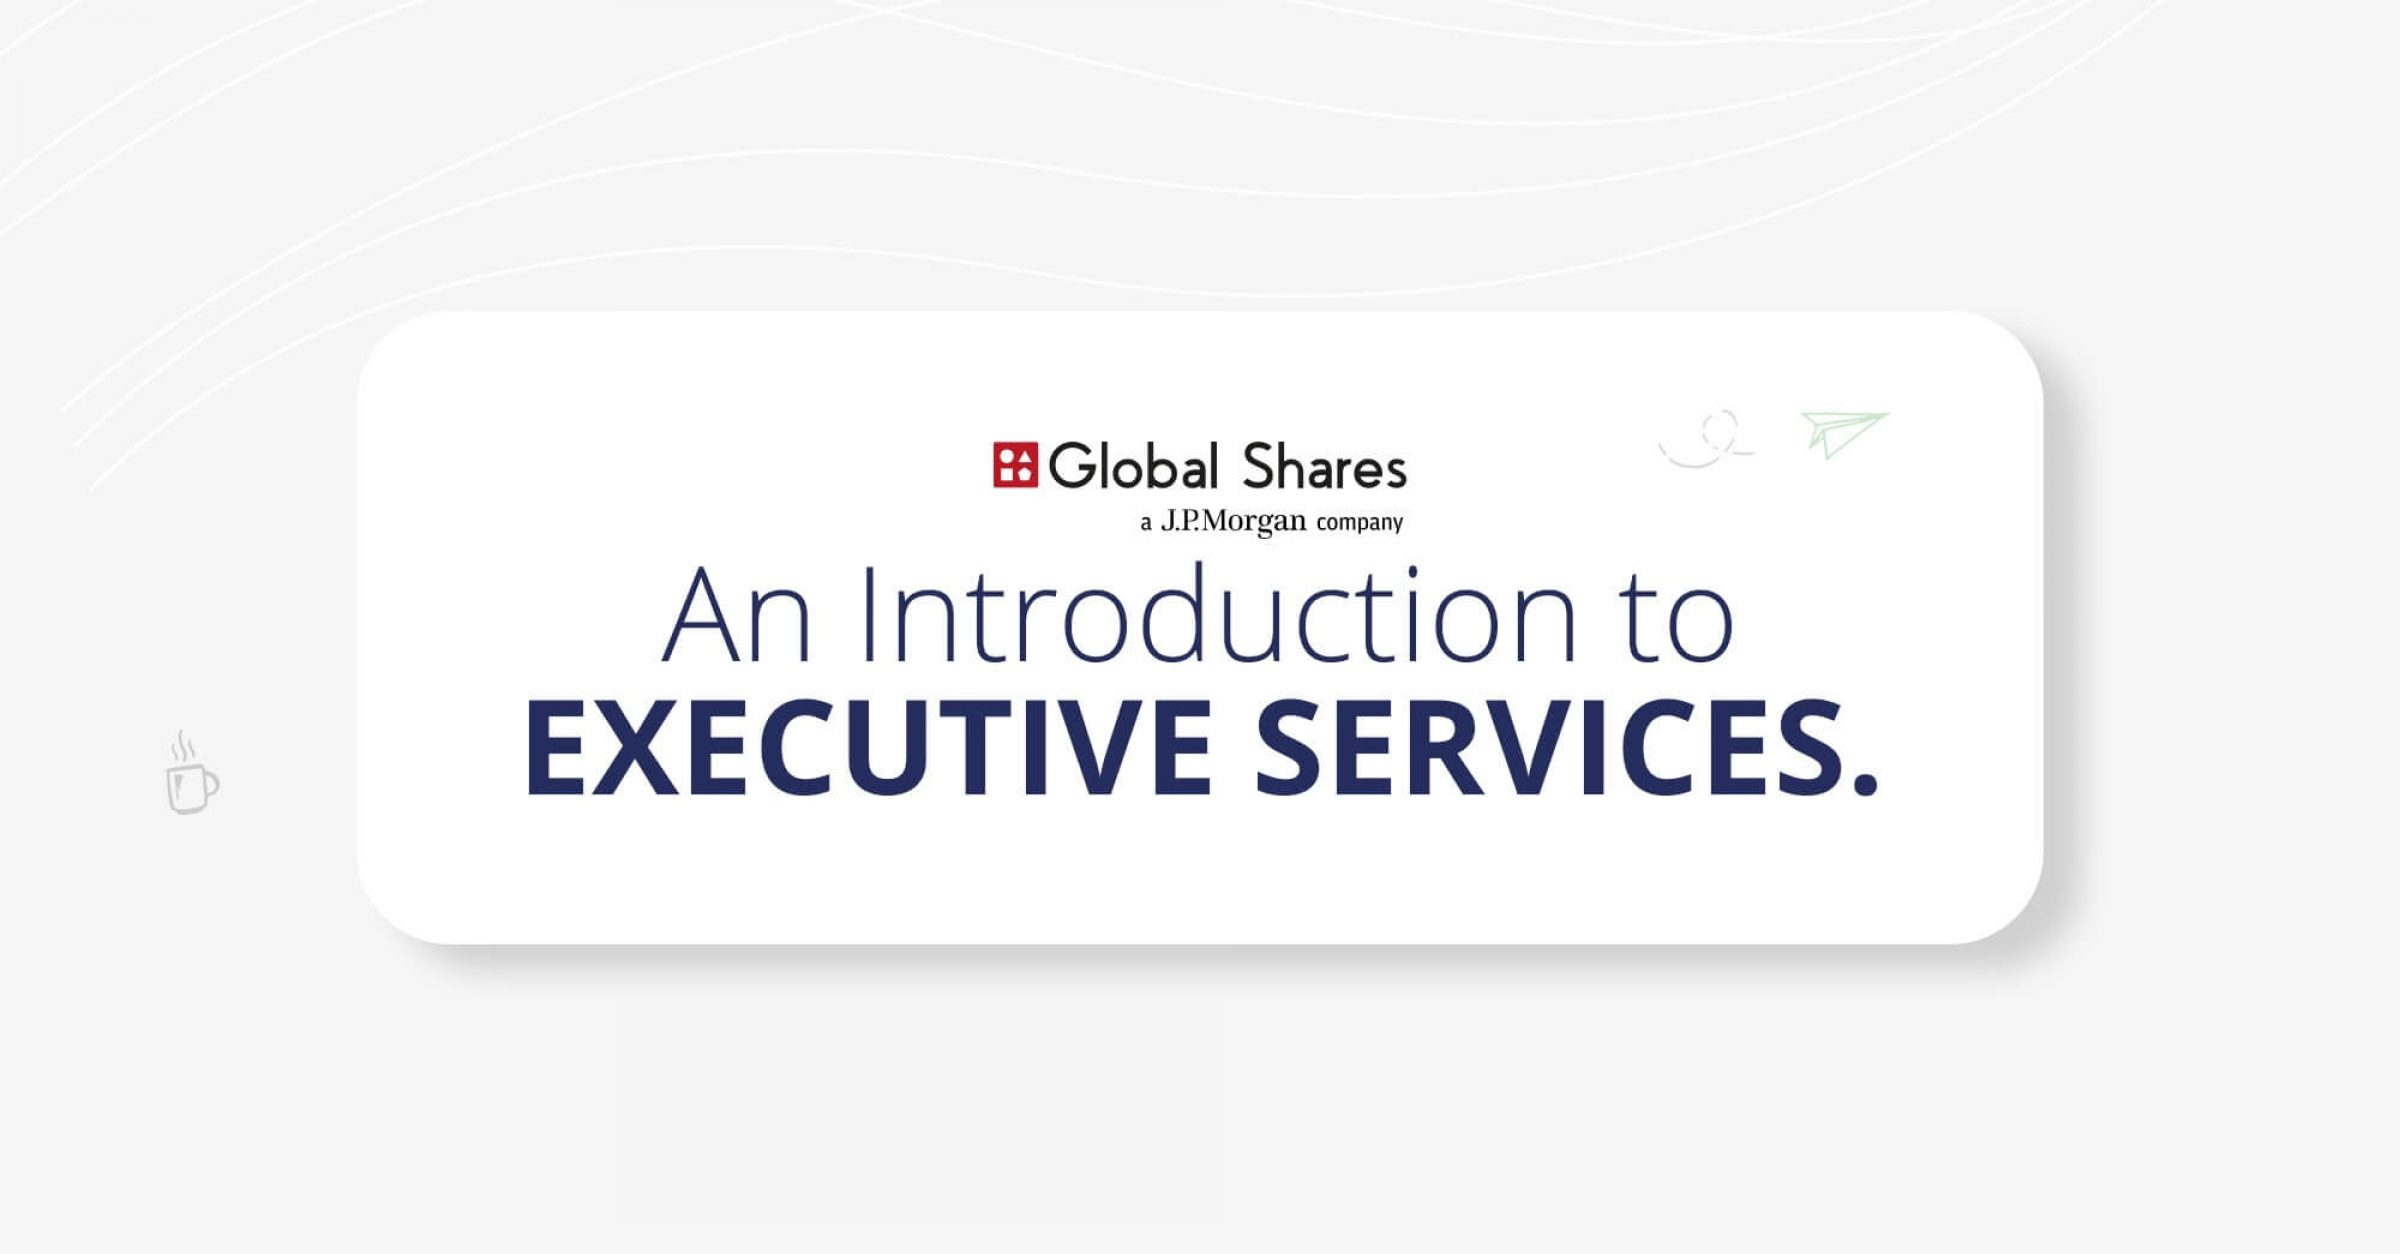 Executive Services, 10b5-1 and protecting against Insider Trading liability